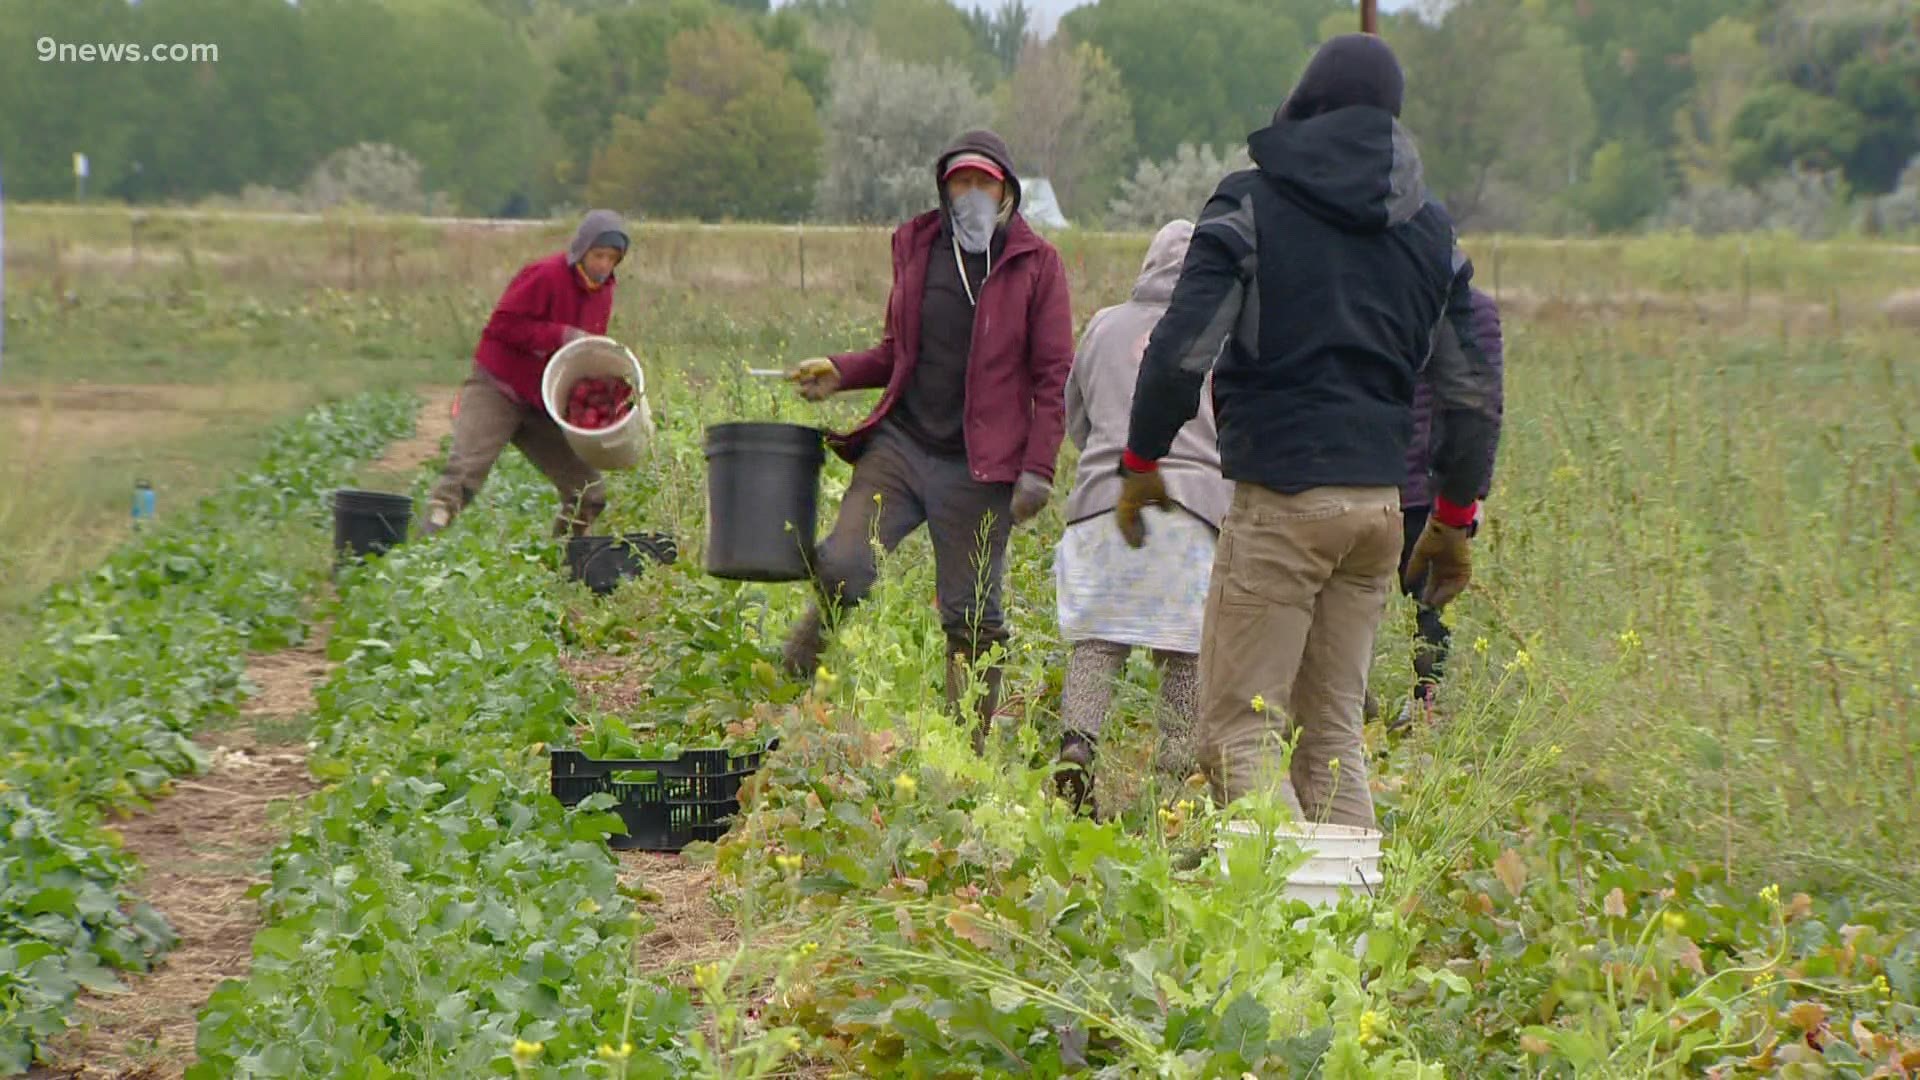 With a community of harvesters, they got to work on Monday picking as much as they could before the storm.